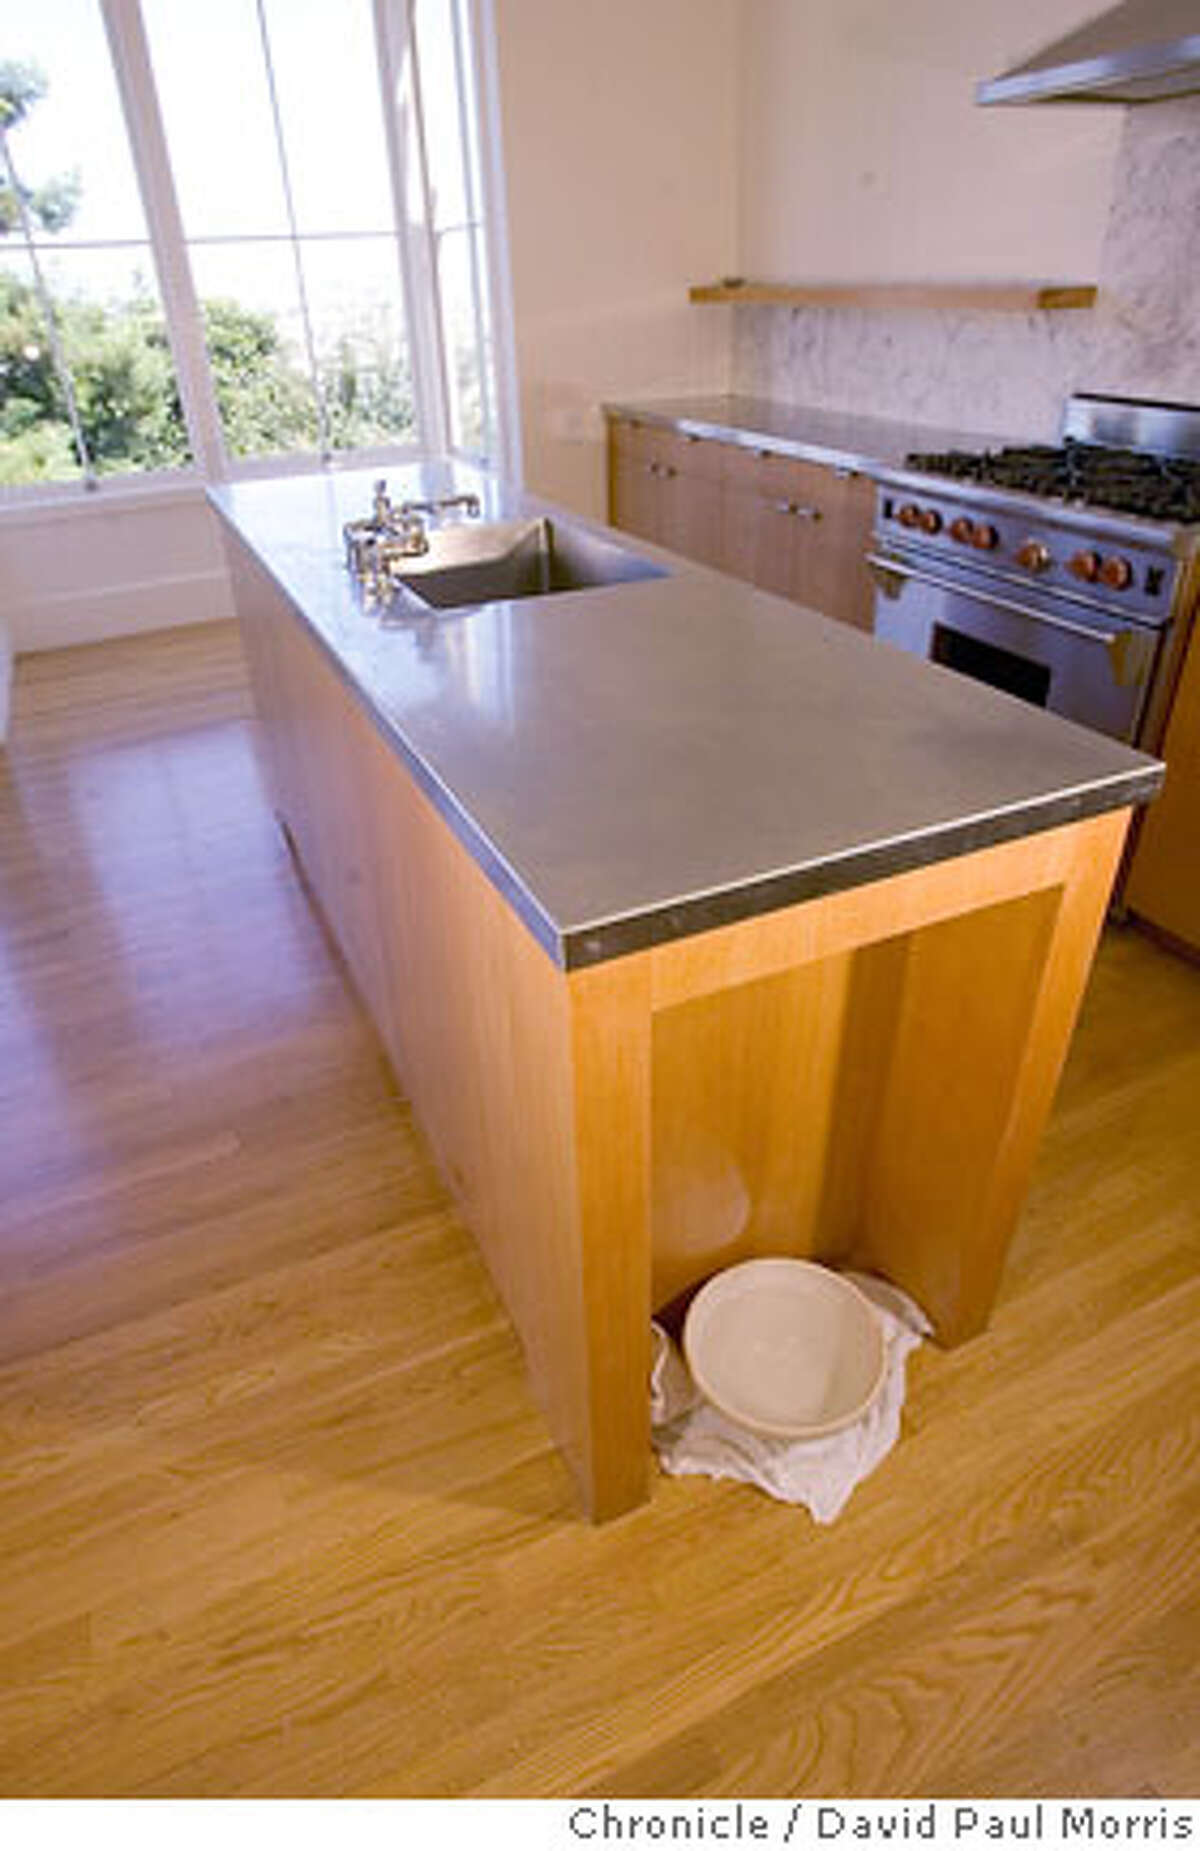 SAN FRANCISCO, CA - JULY 31 The kitchen island recess with dog bowl inside the former home of Malcolm Davis on July 31, 2006 in San Francisco, California. (Photo by David Paul Morris/ The Chronicle) Ran on: 08-27-2006 Left: the hidden cubby for Ace the wonder dog at Jeff Kings house; below, a kitchen island recess with dog bowl in Malcolm Davis home.